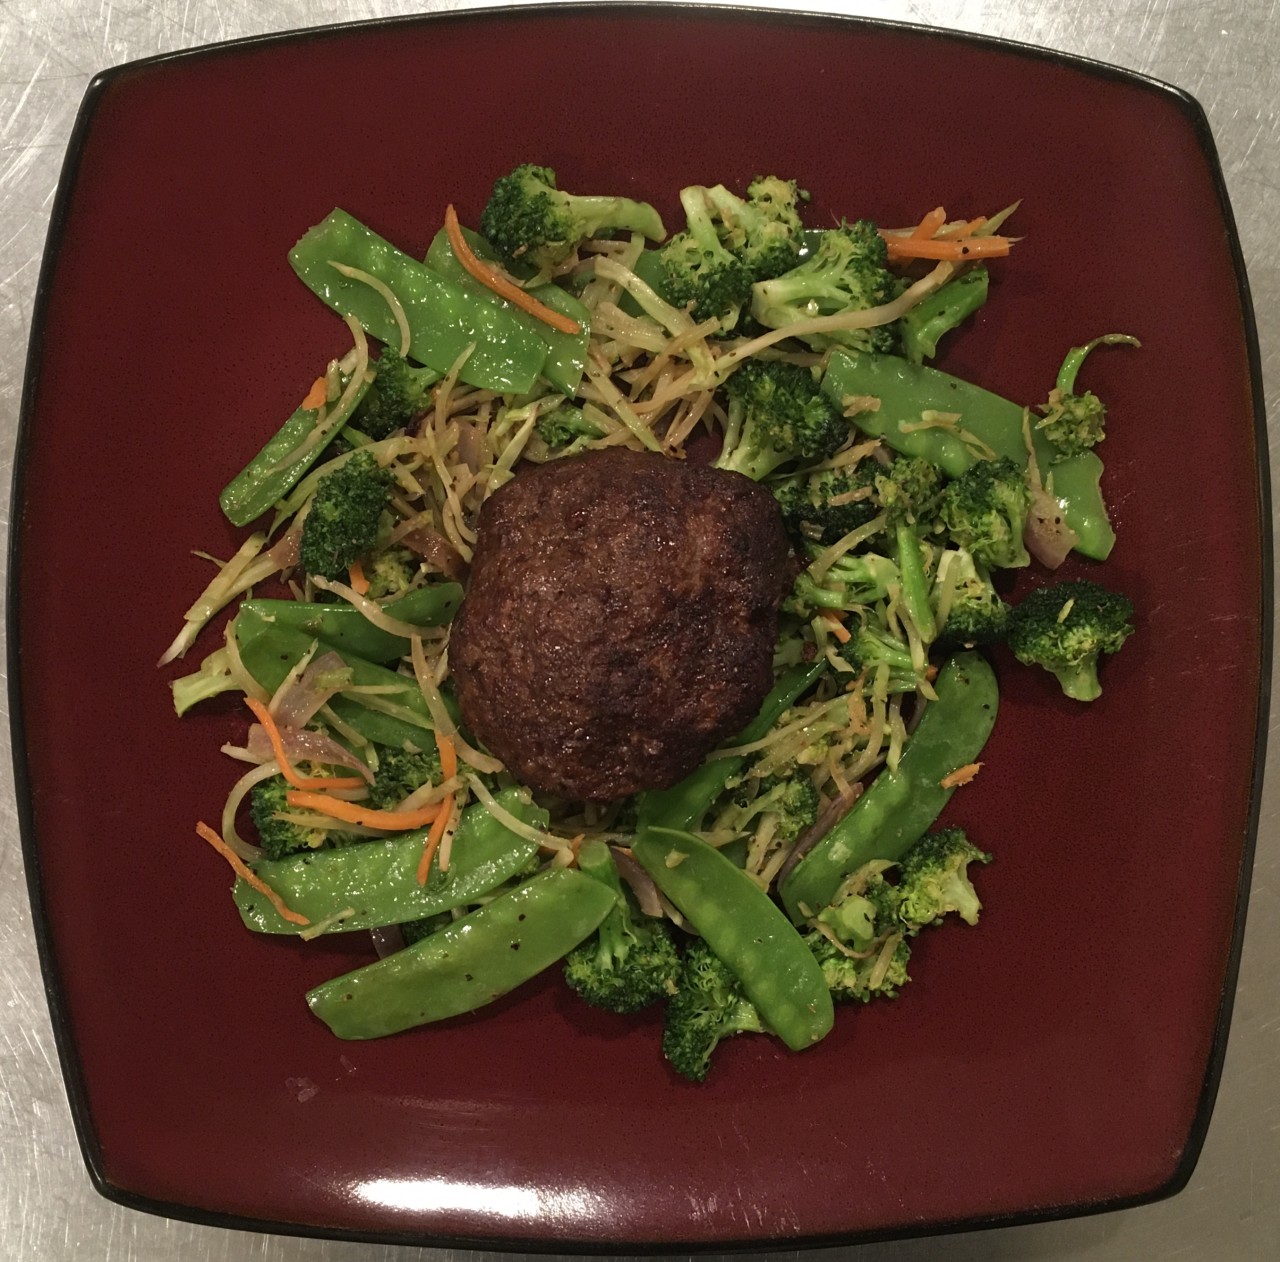 <a class="bx-tag" rel="tag" href="https://streetloc.com/view-channel-profile/whatsfordinner"><s>#</s><b>whatsfordinner</b></a> Grilled Burger with Butter Sautéed Vegetables